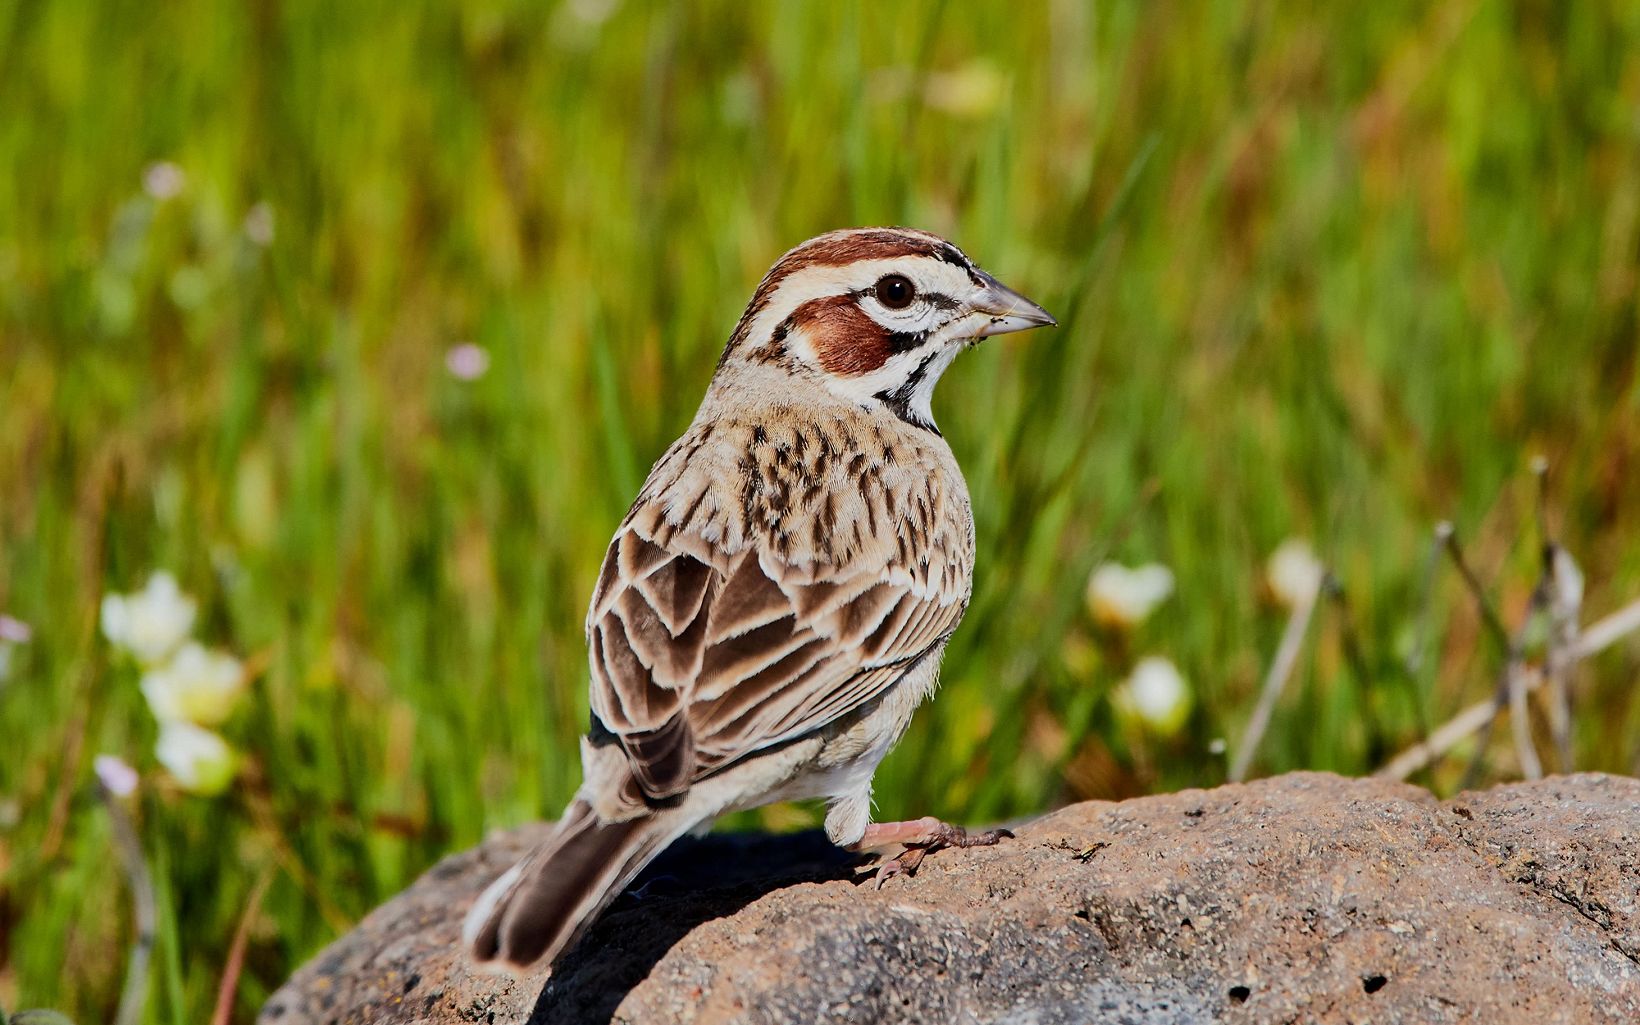 Lark Sparrow Lark Sparrows can be seen in spring and summer in Ohio and will nest in open grassy fields. © FrankDLospalluto, CC BY-NC-ND 2.0